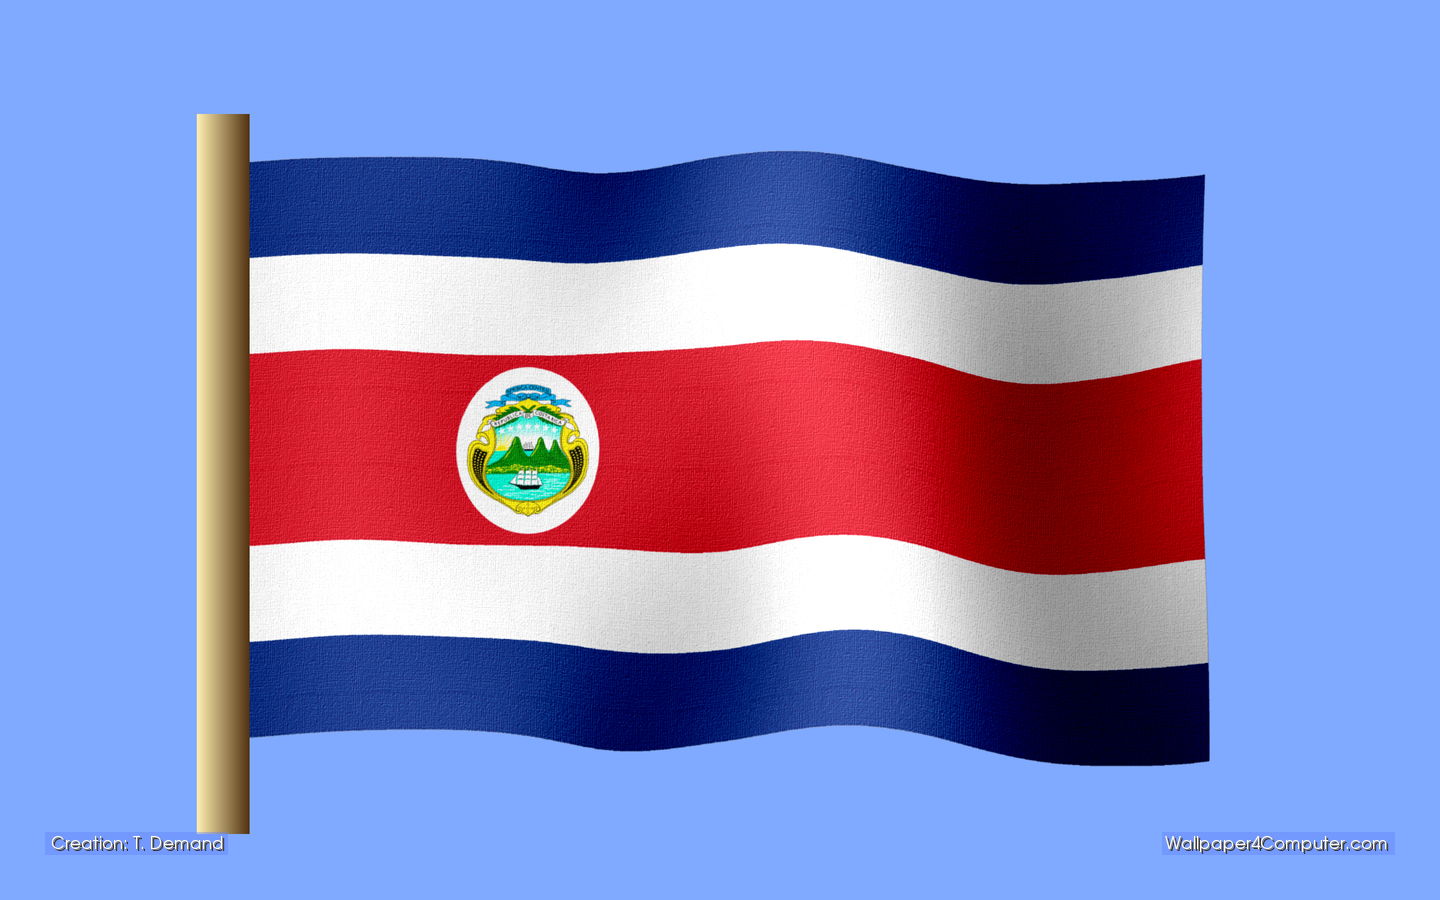 Flag of Costa Rica. Creation: (c)2007 T. Demand, Wallpaper: 2011 T. Demand, Wpic This wallpaper is free to be used as a desktop wallpaper on your computer. Any other usage, publication, distribution is not allowed.